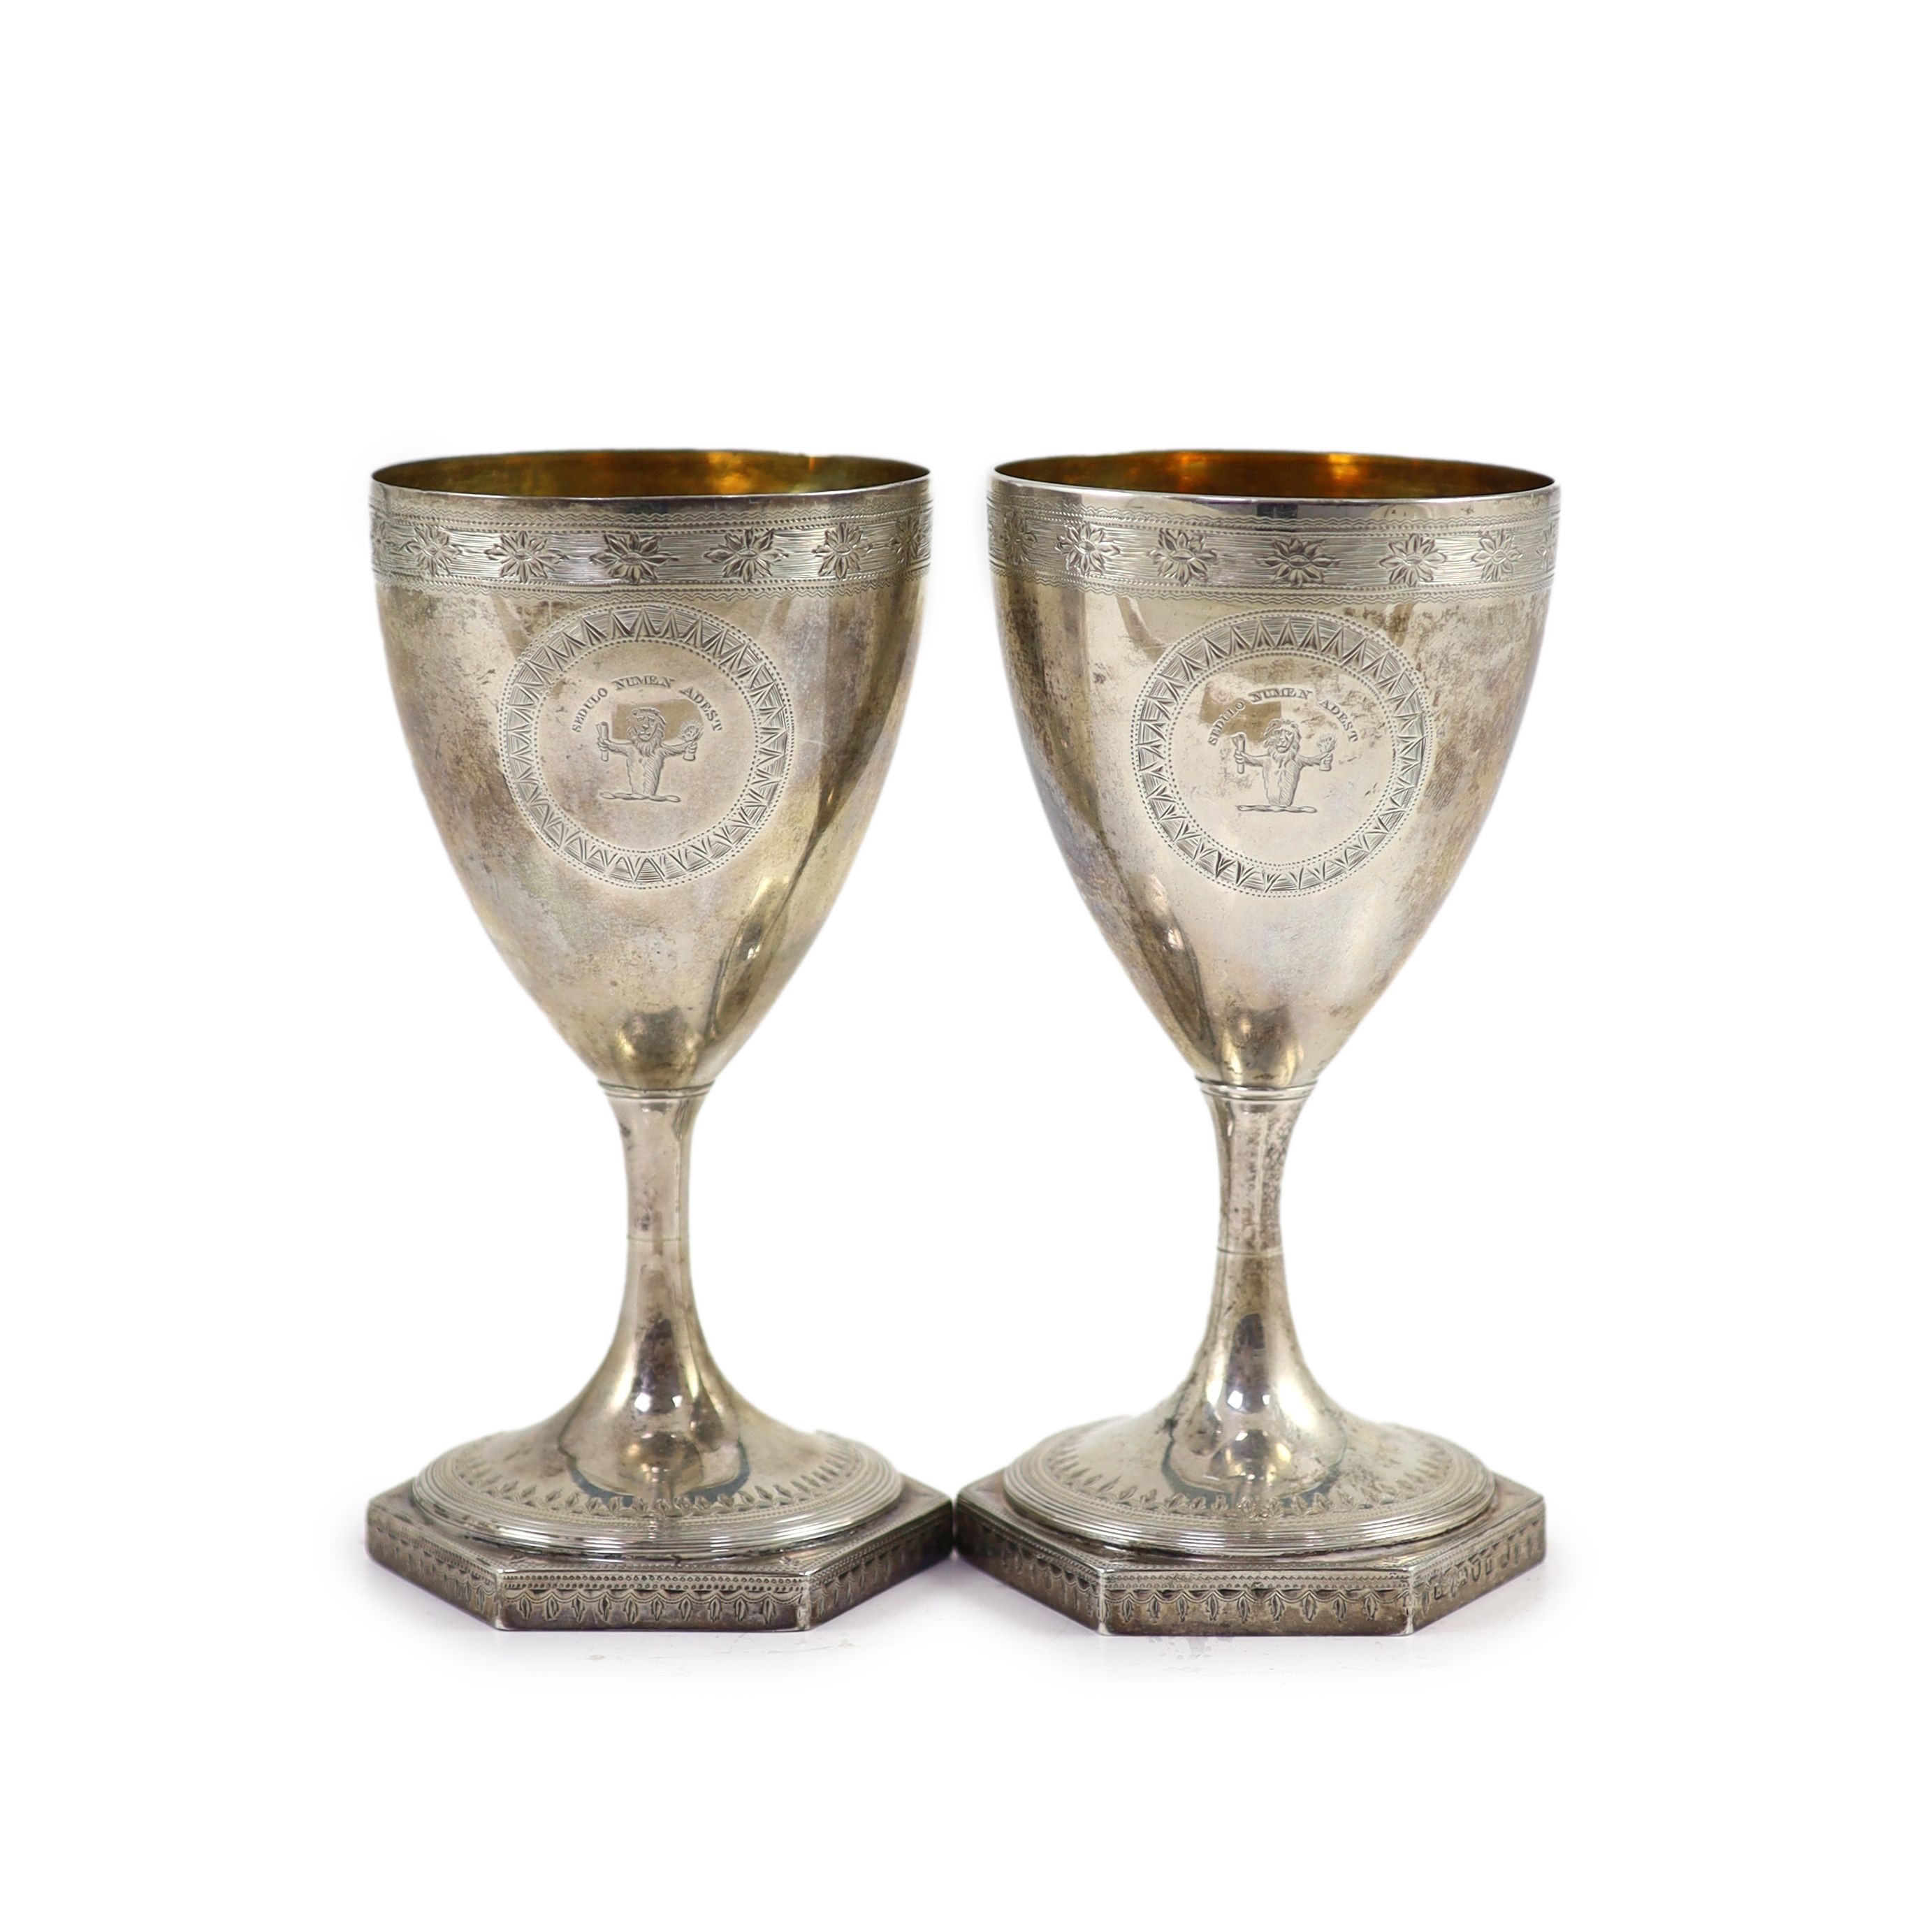 A pair of George III silver goblets, by Benjamin Mountigue